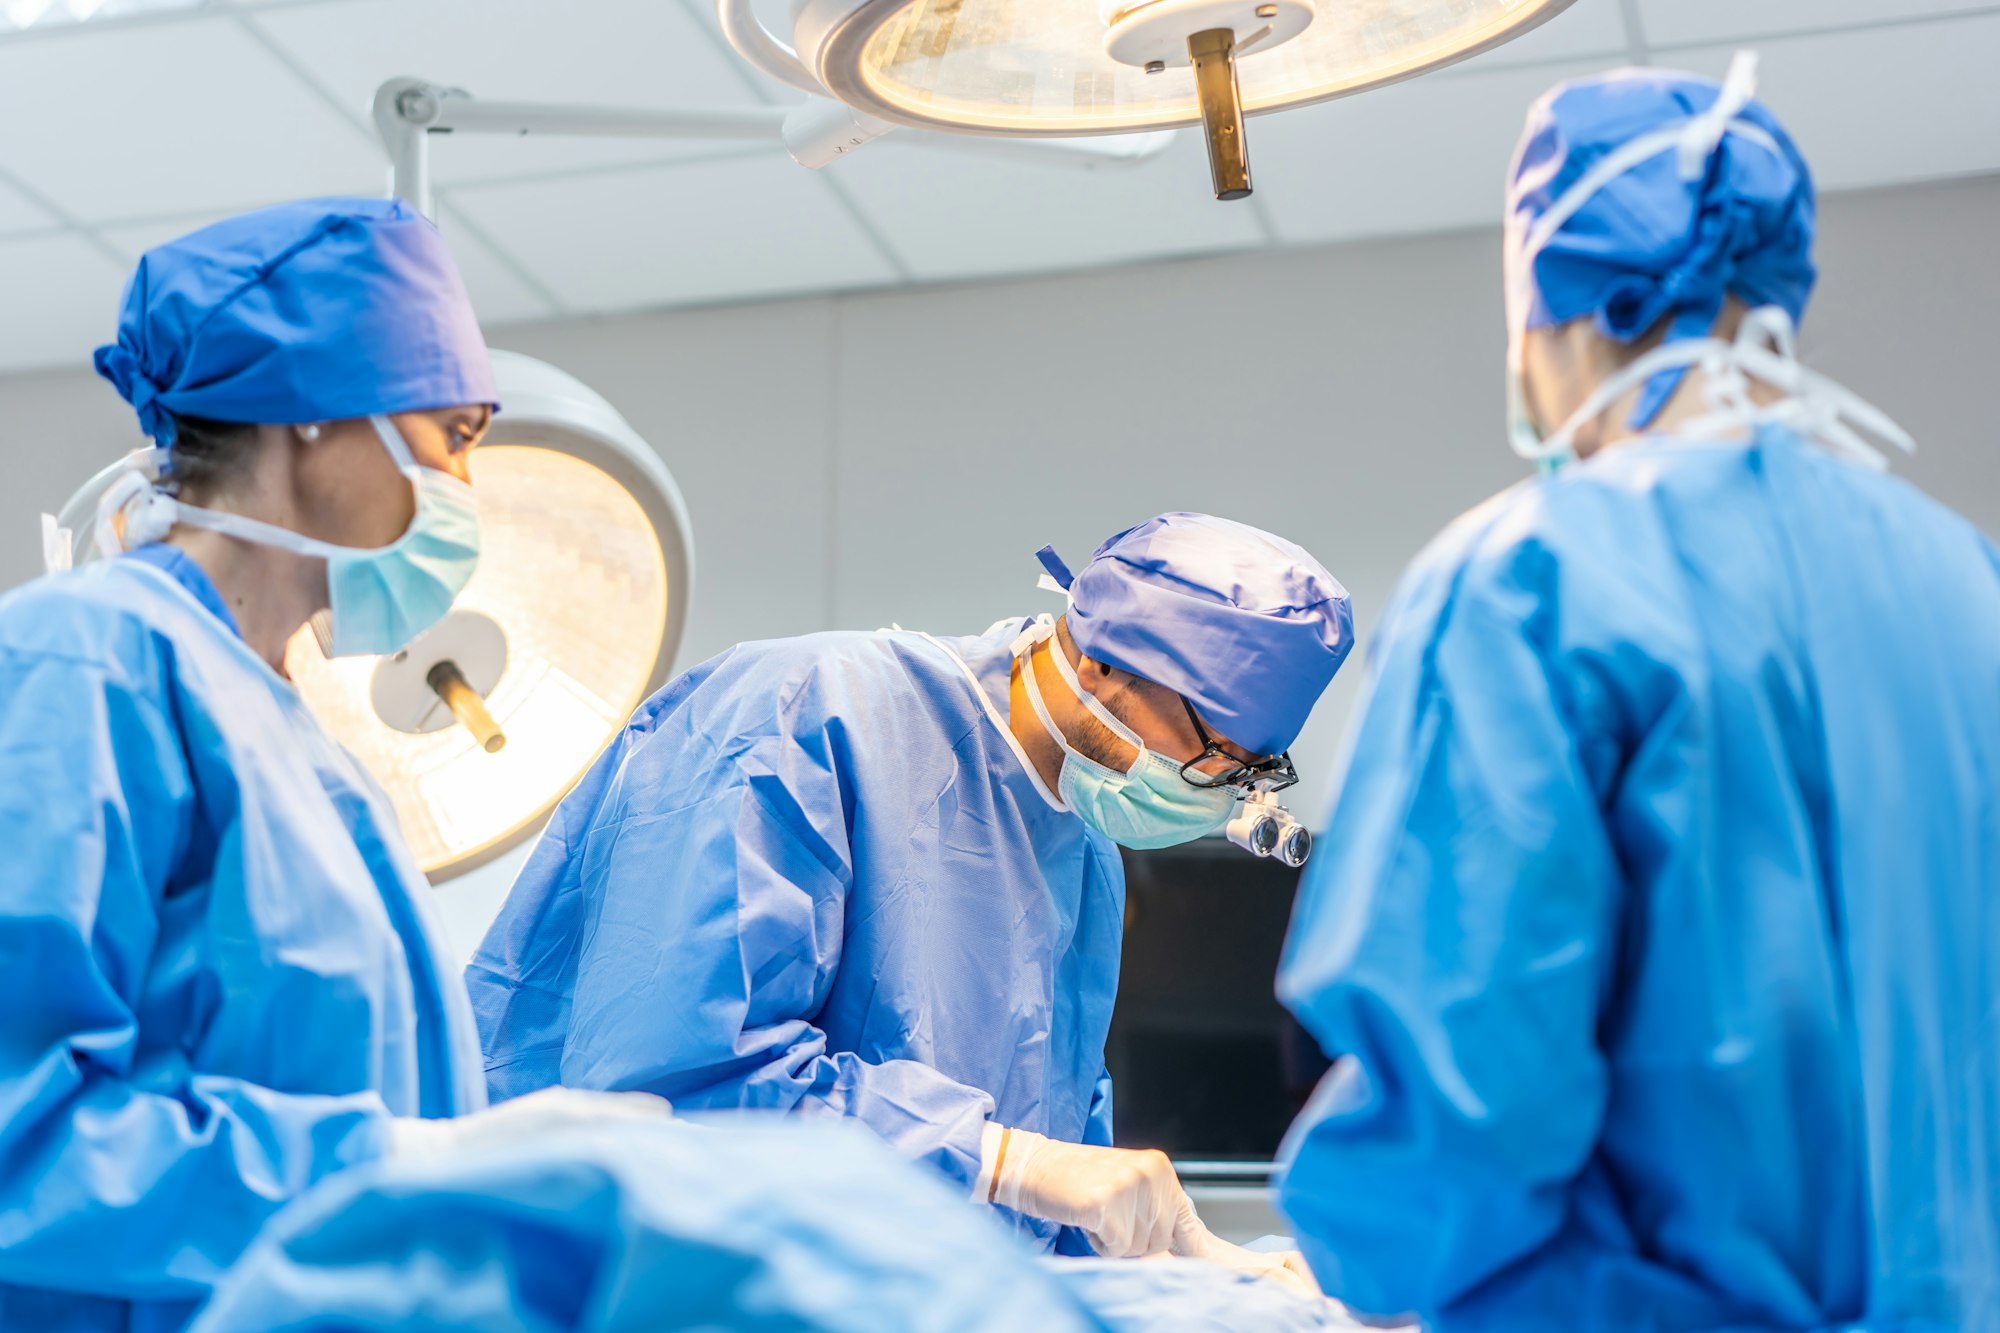 Professional doctors performing surgical operation in operating room.